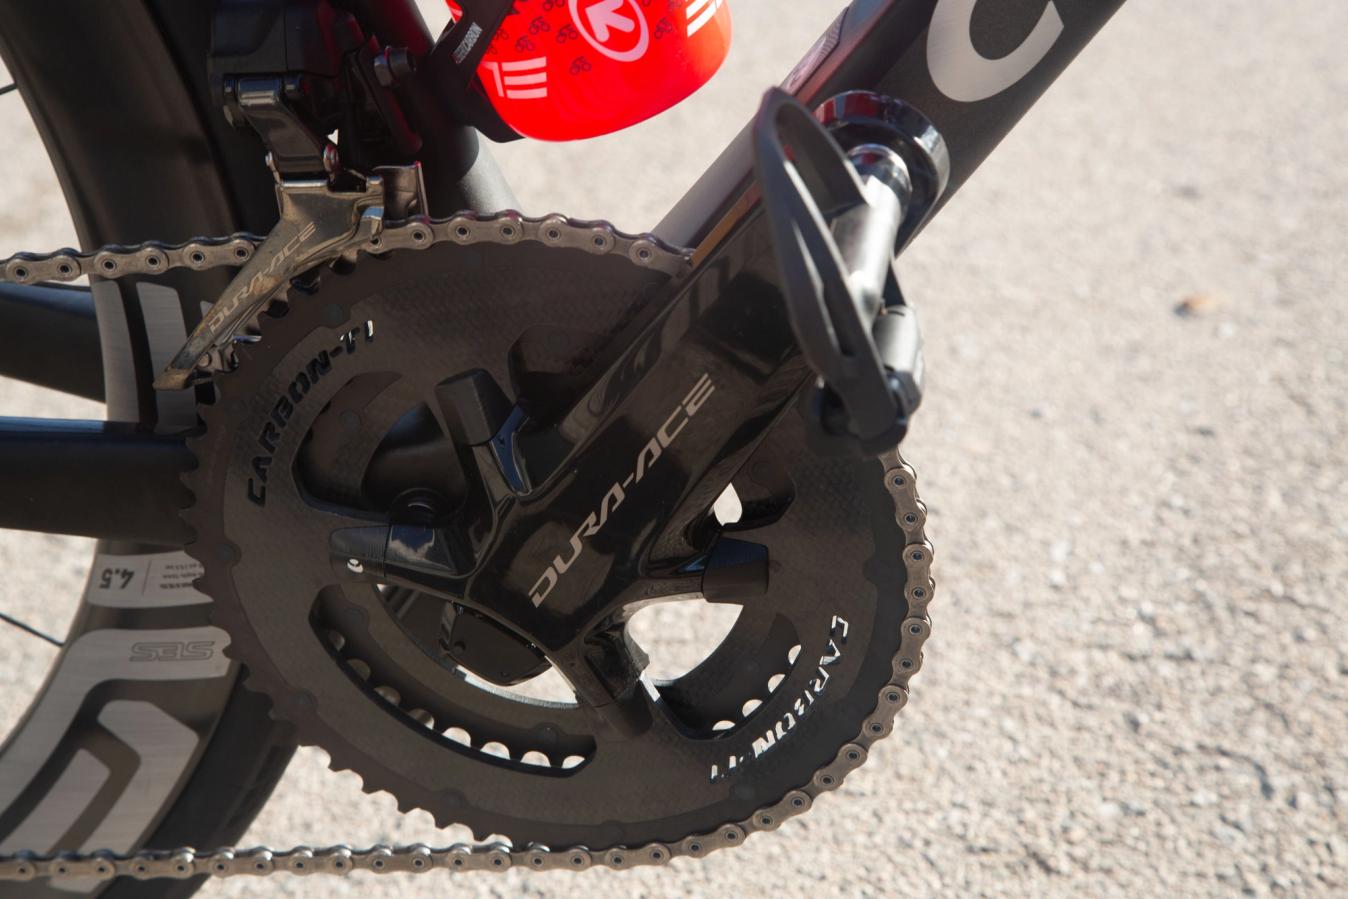 Ayuso's Carbon-Ti chainrings